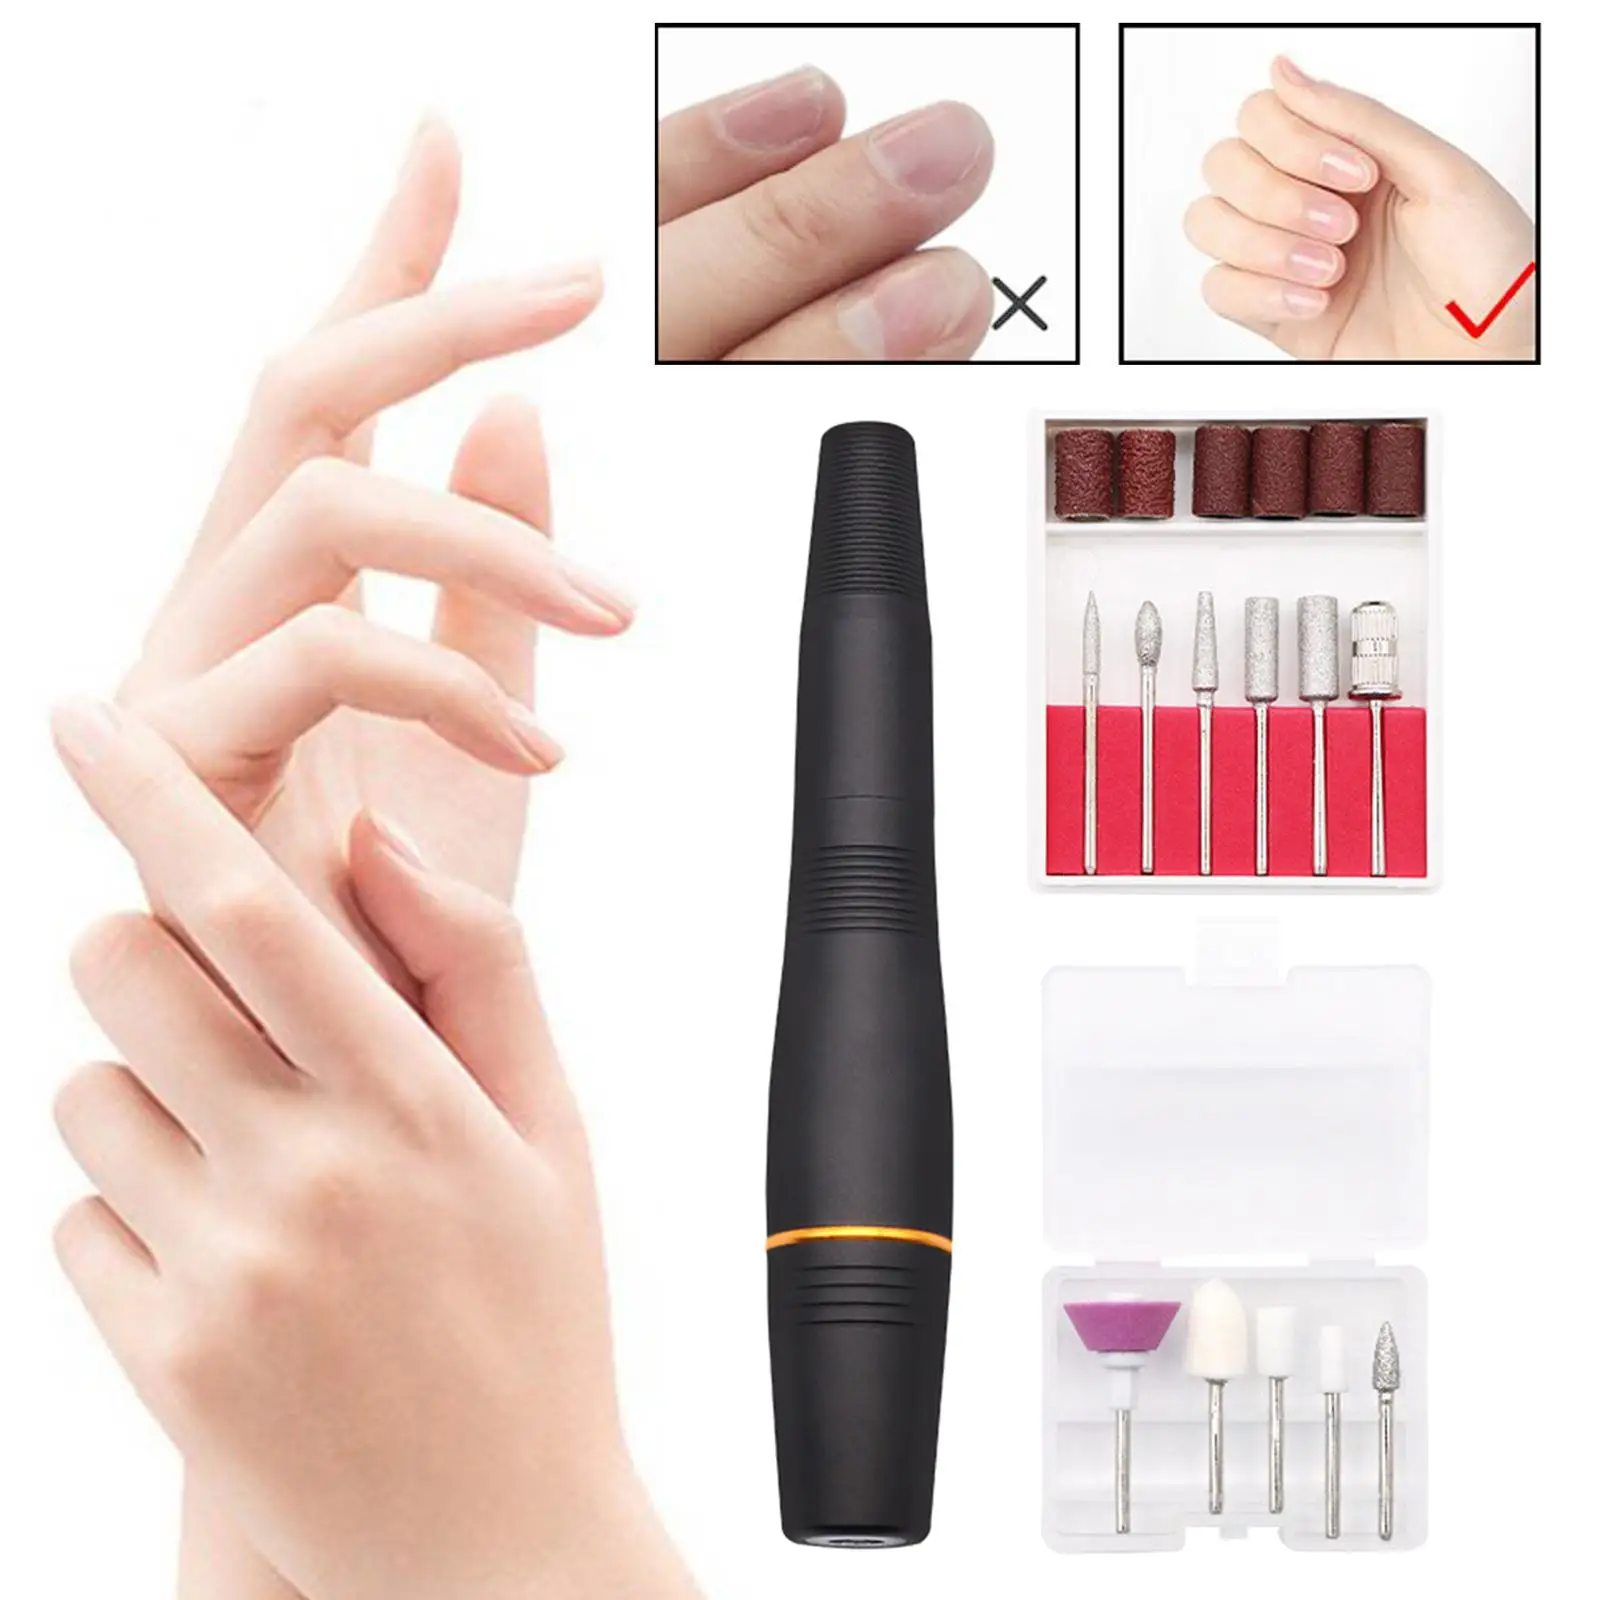 Professional Electric Nail Drill Machine Cordless Nail Polishing Tool Strong Trimmer Nail Grinder for Gel Polish Pedicure Carve